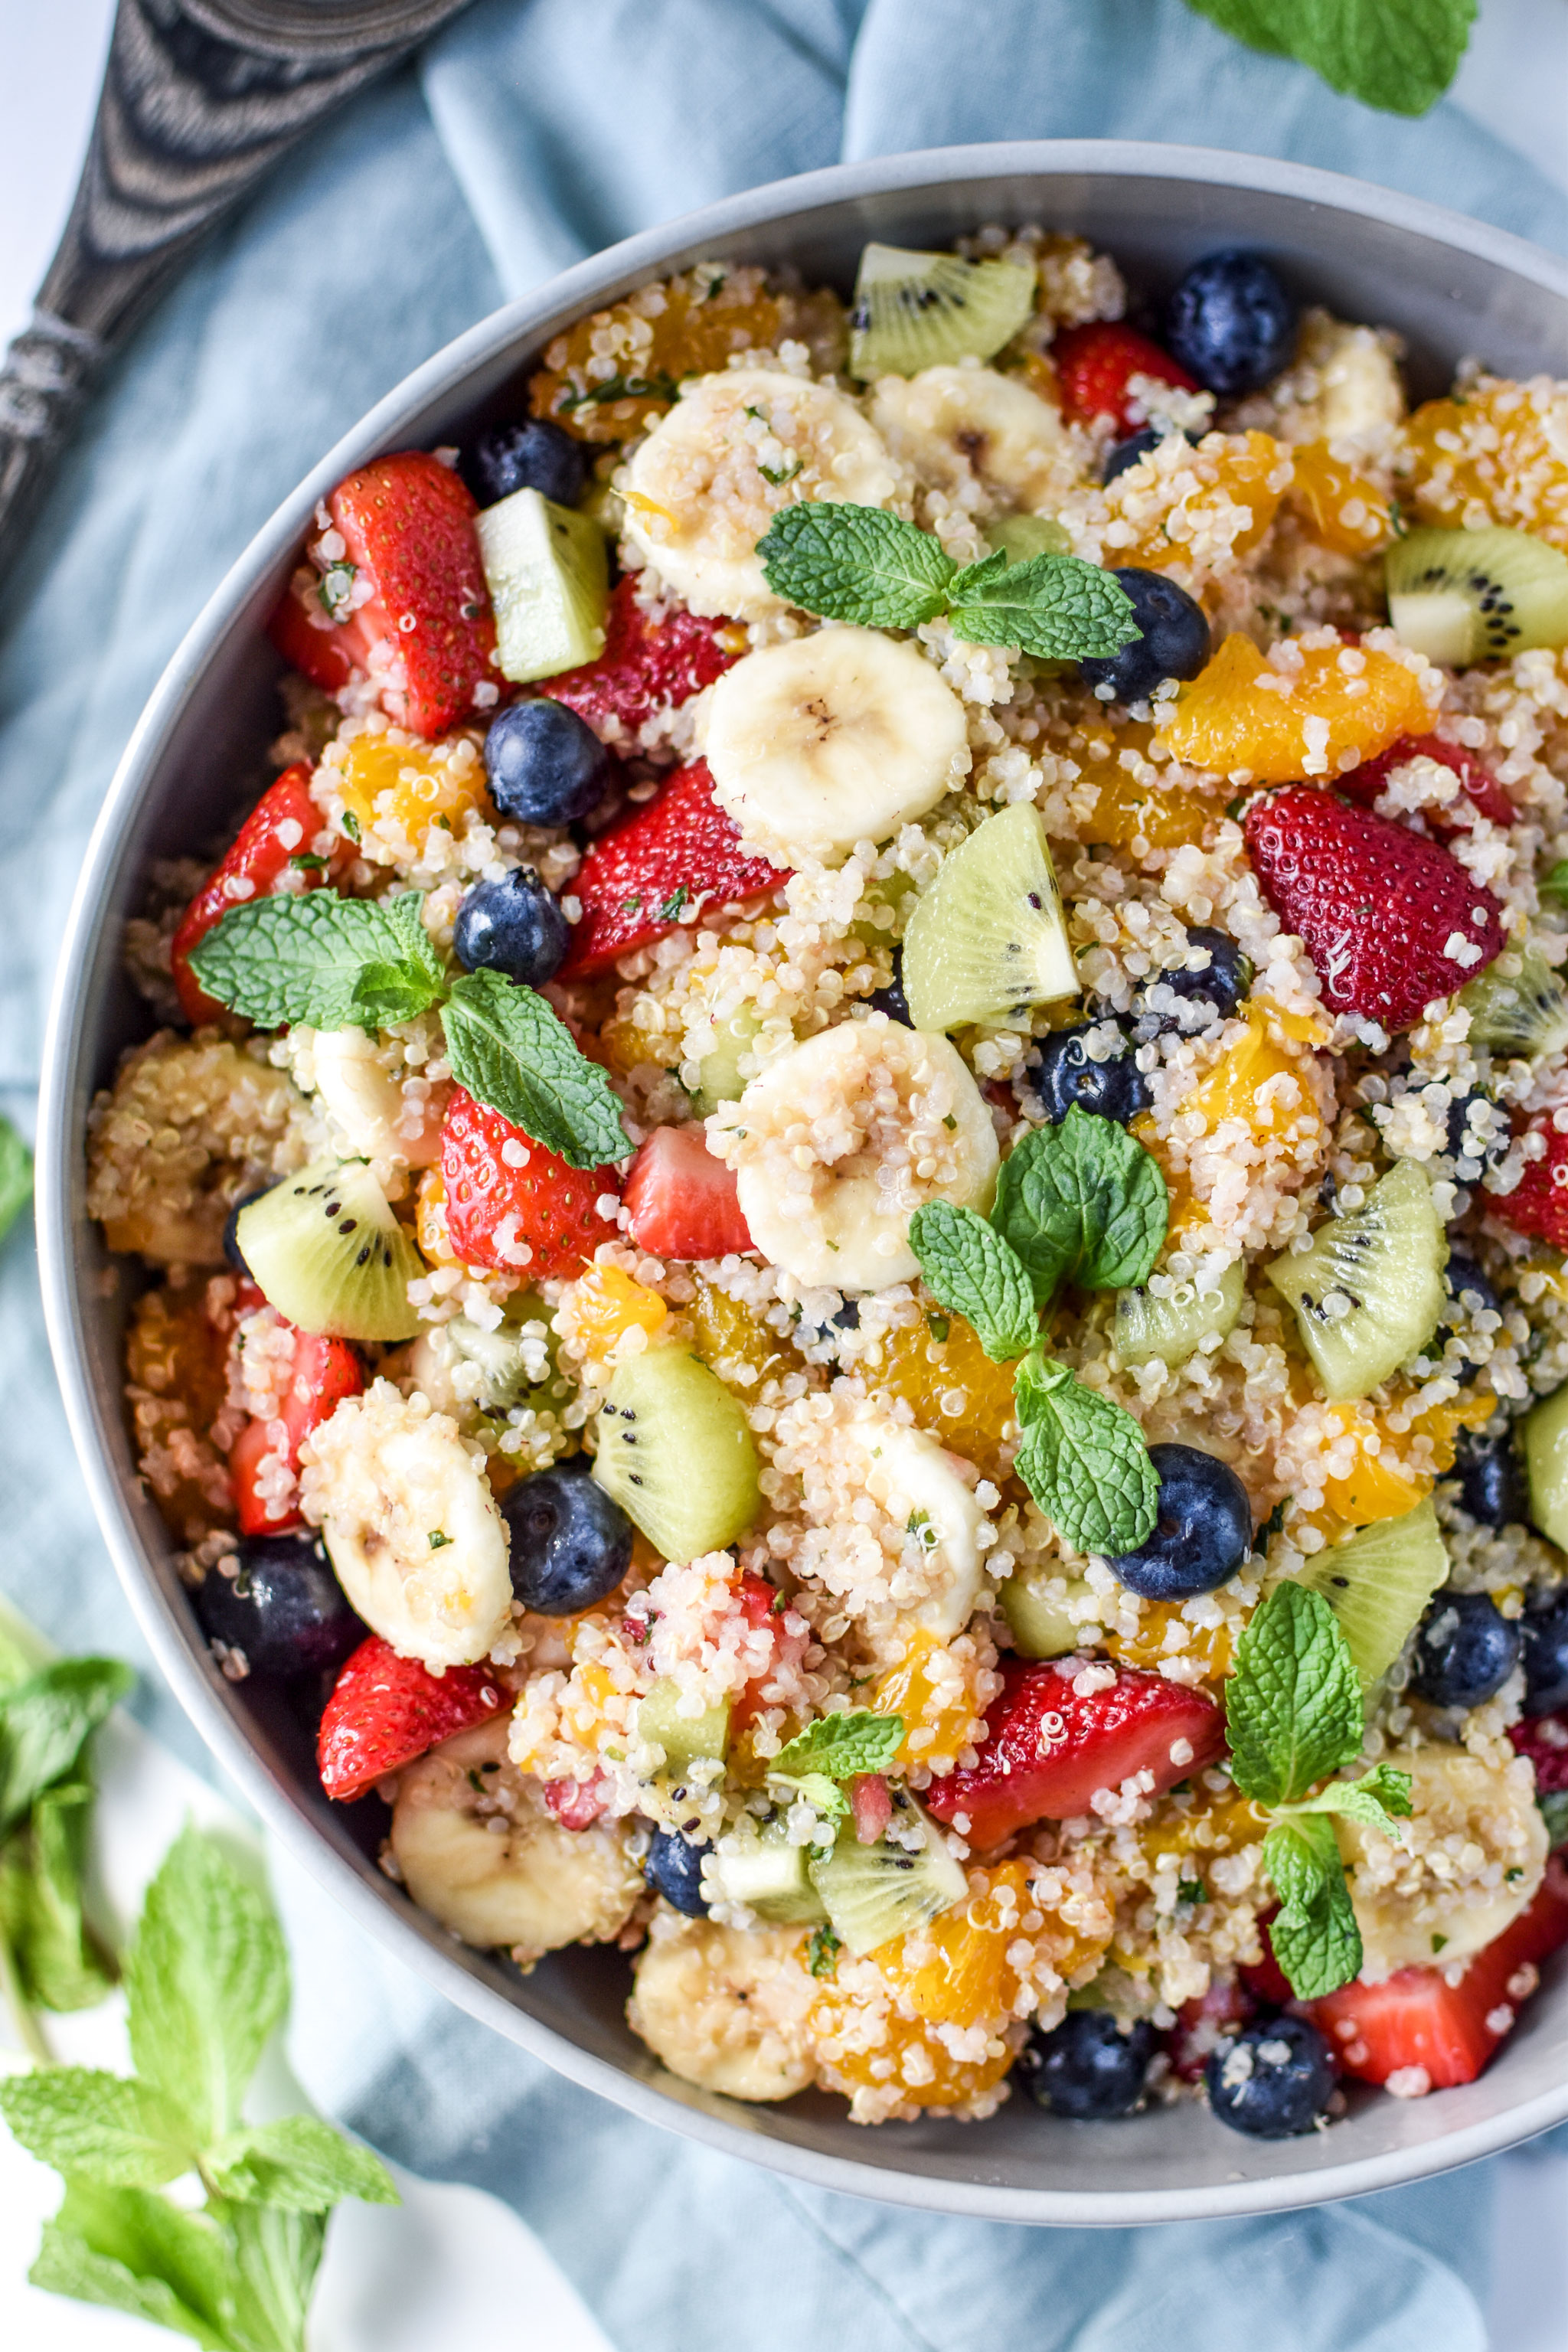 Mint Quinoa Fruit Salad pictured in a serving bowl with mint garnish